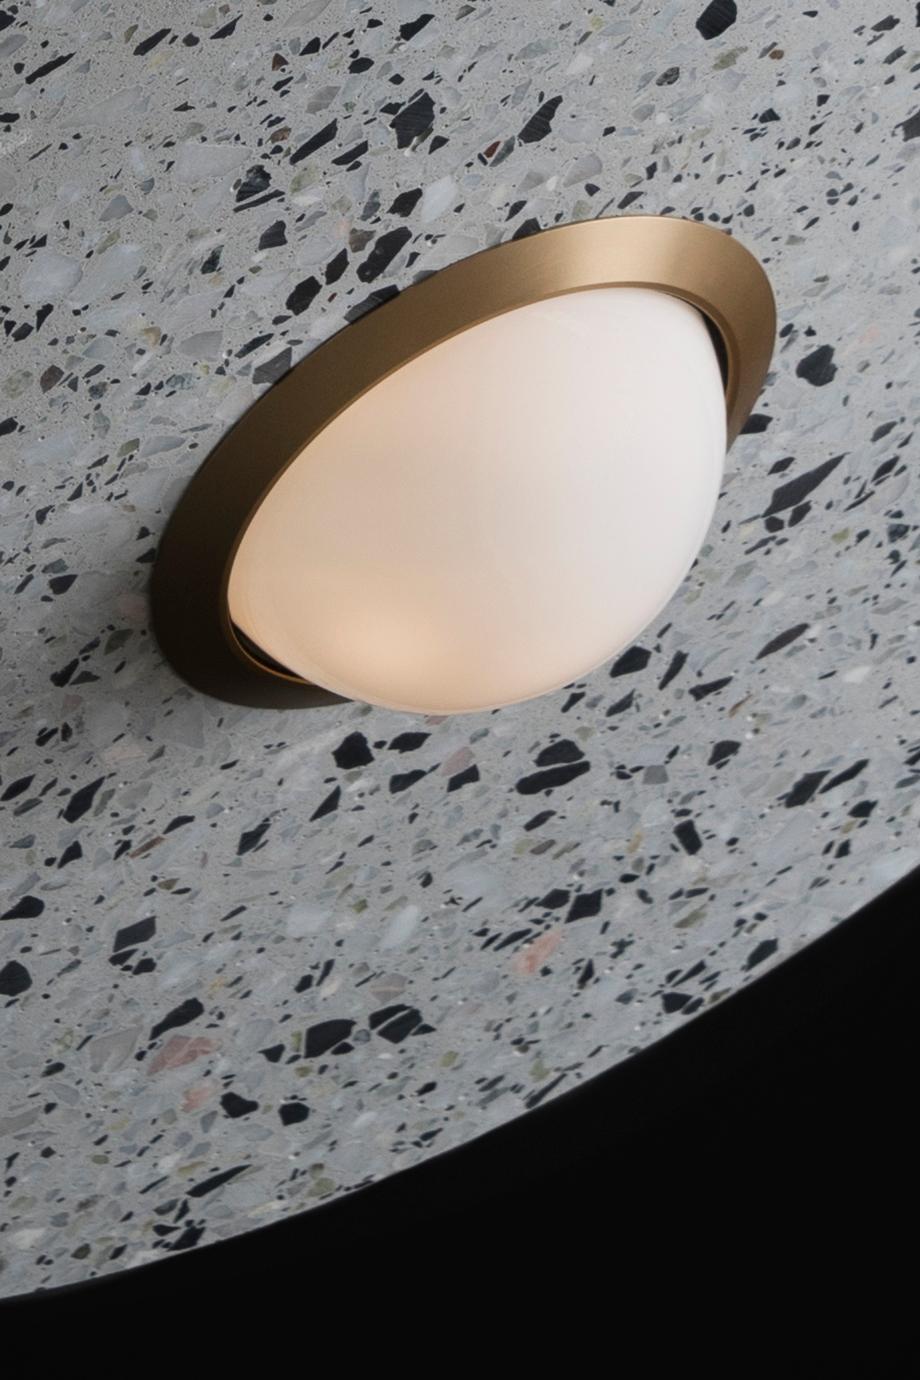 Terrazzo pendant lamps designed by Cantonese studio Bentu Design

Black wire 2m adjustable. Bulb G4 LED / 220V / 3W
Measures: Ø 45 × H 15.5 cm.

These pendant lamps are available in different colors of terrazzo: white, black, red or blue.

Bentu